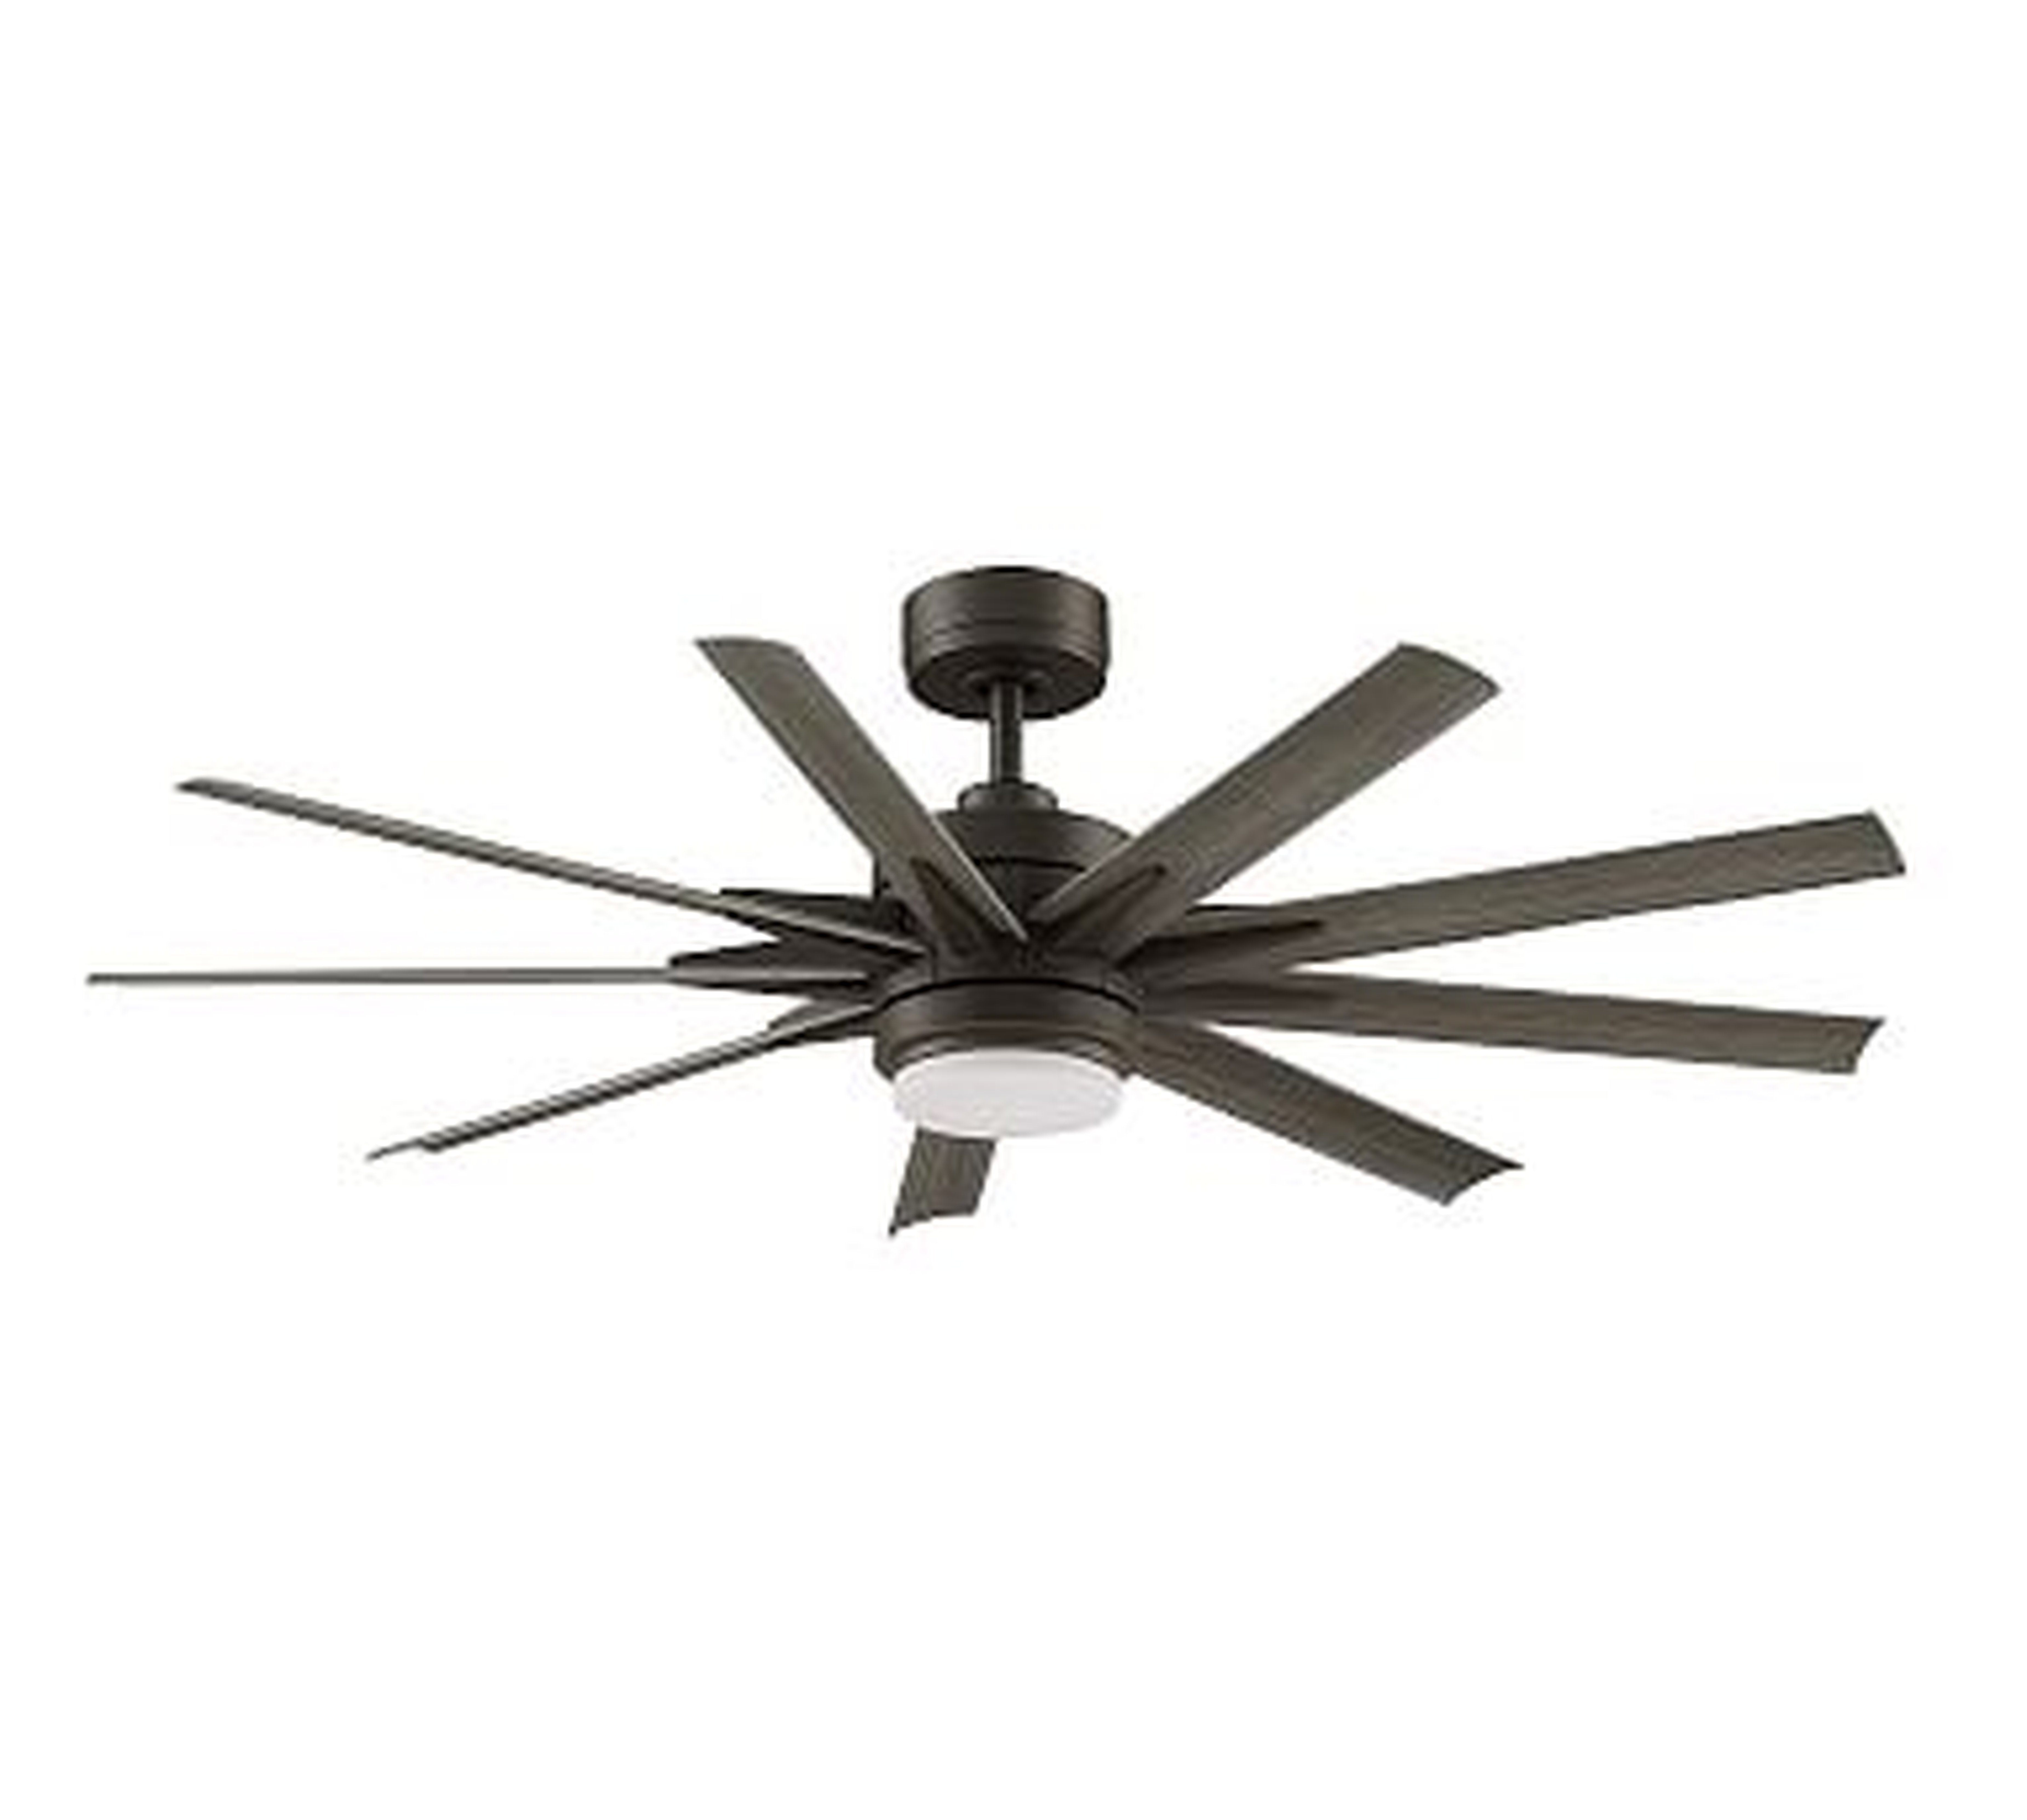 Odyn 56" Indoor/Outdoor Ceiling Fan, Matte Greige with Weathered Wood Blades - Pottery Barn